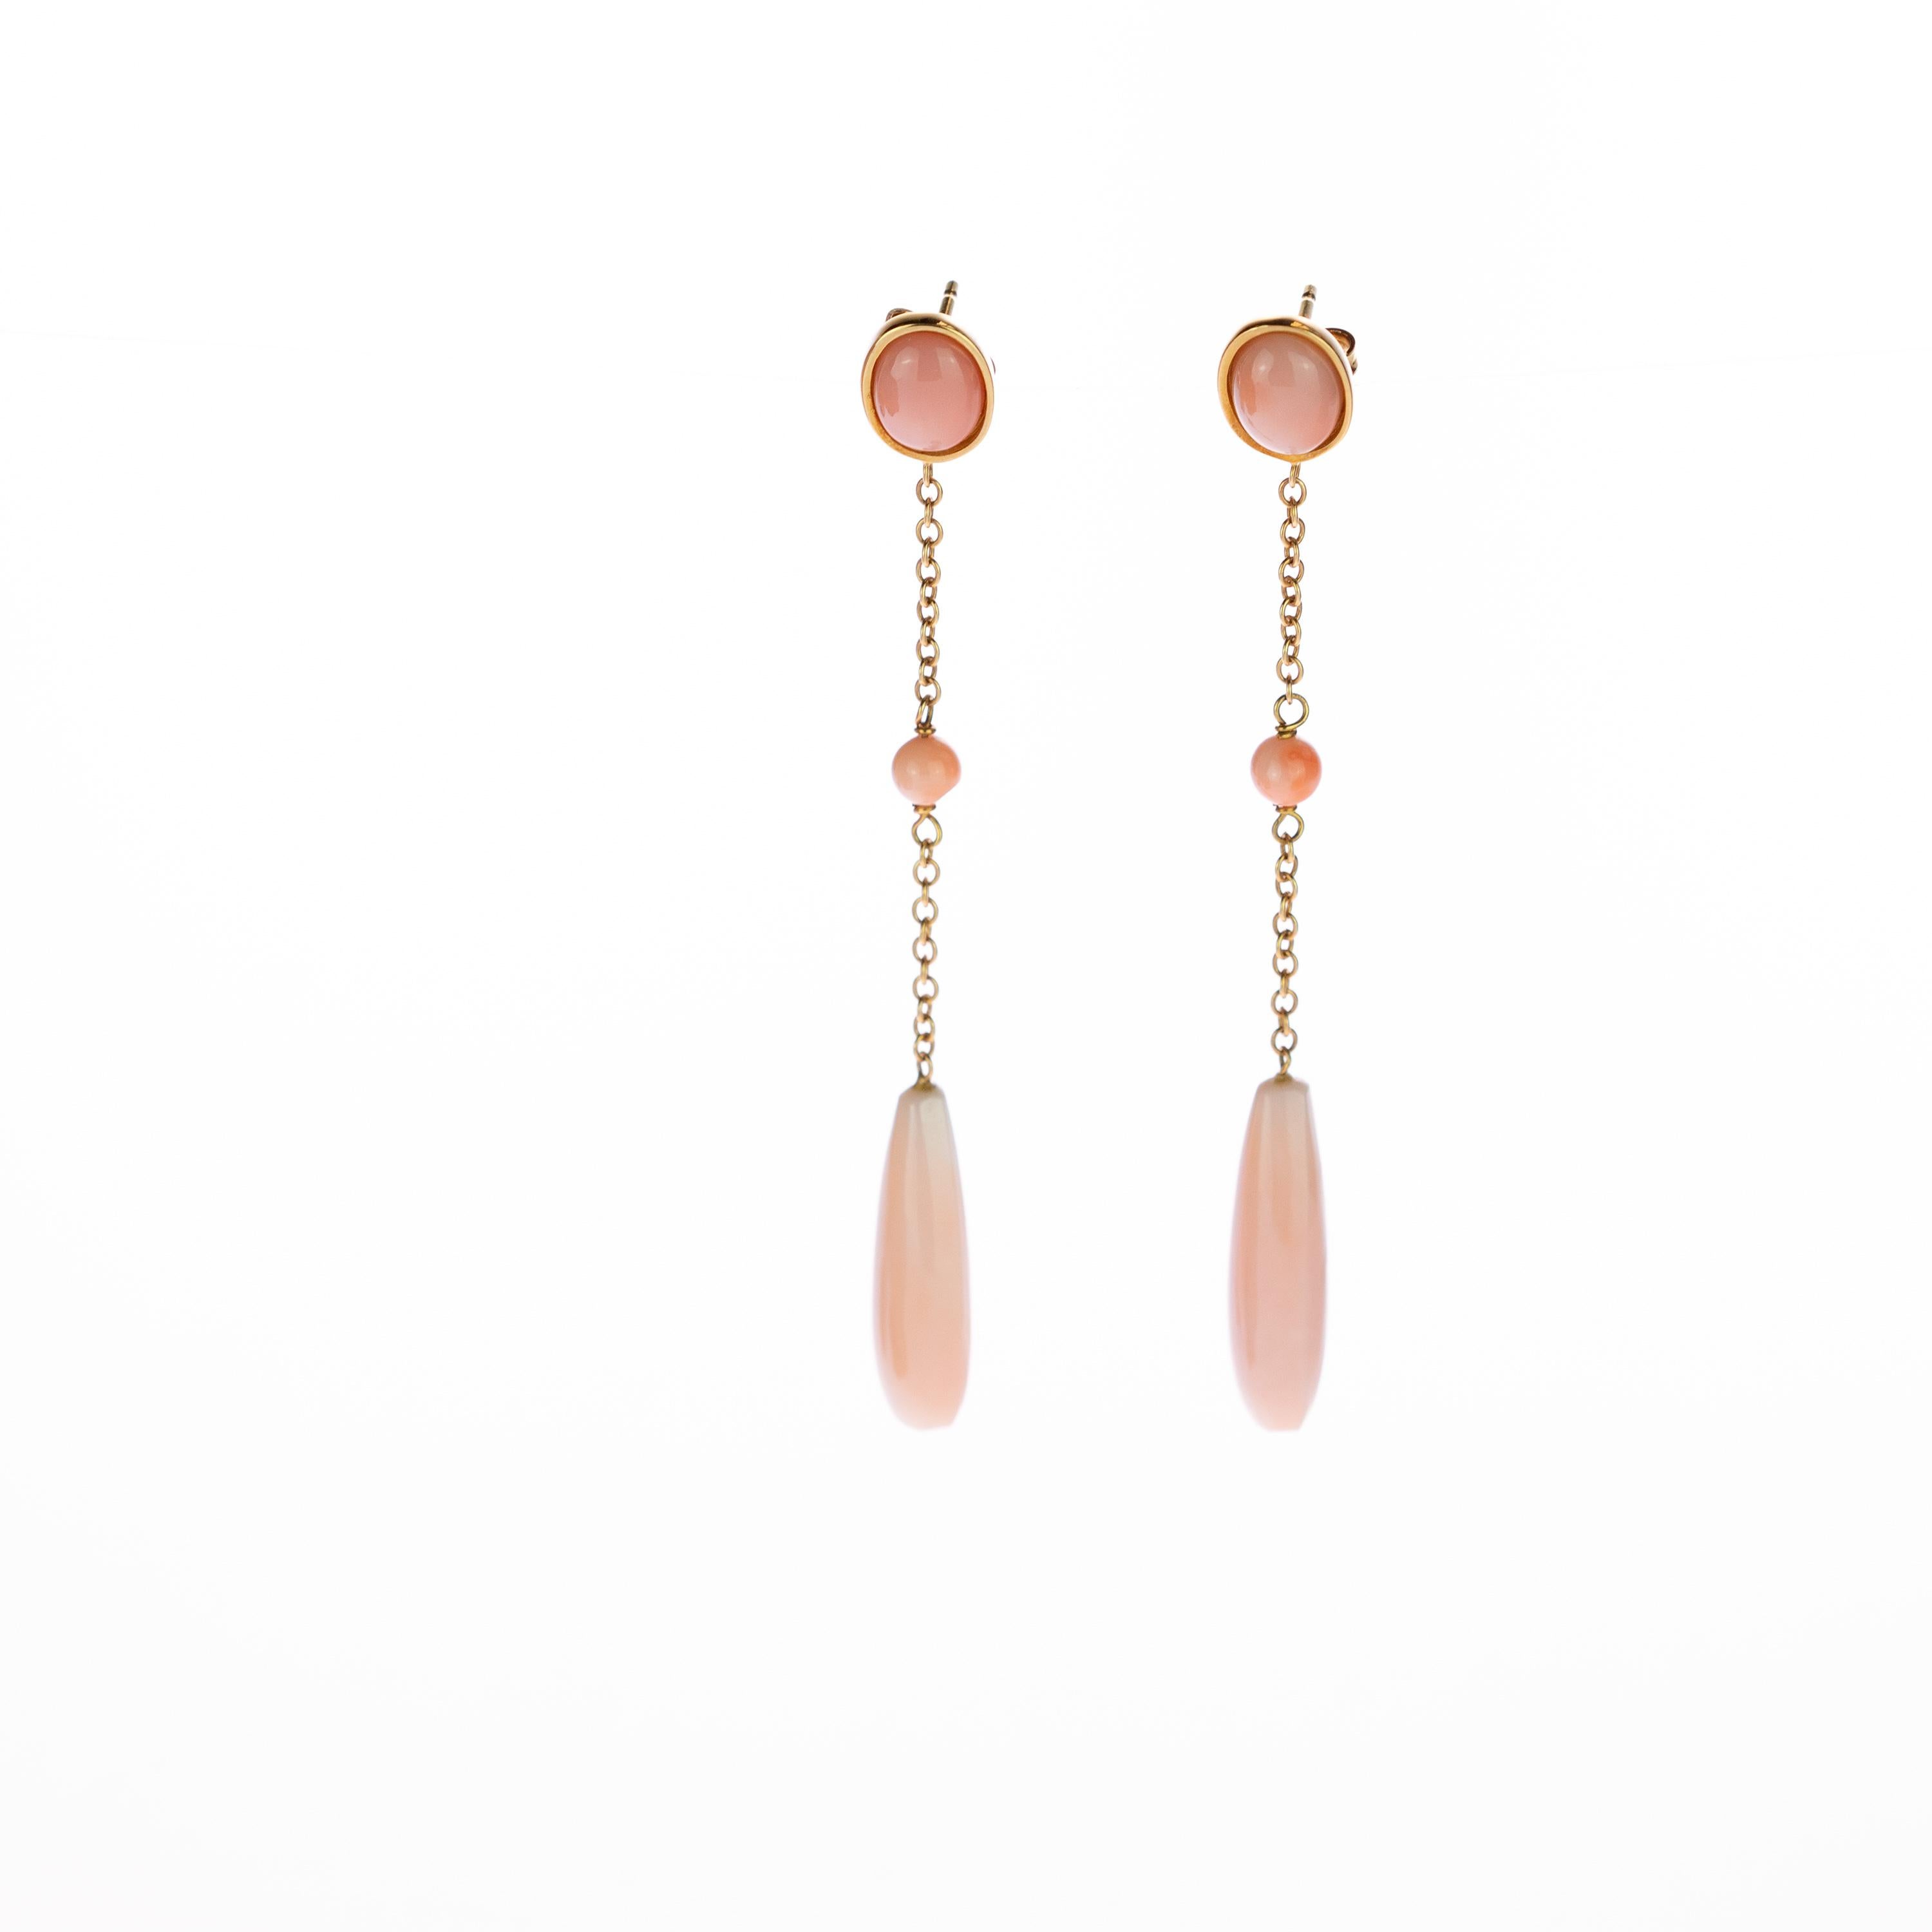 Colossal and extraordinary dangle drop earrings modeled in different shapes by pink carved coral embellished with 18 karat yellow gold. A delicate chain that connects an oval cabochon, a round donut and a bold tear or briolette that melted